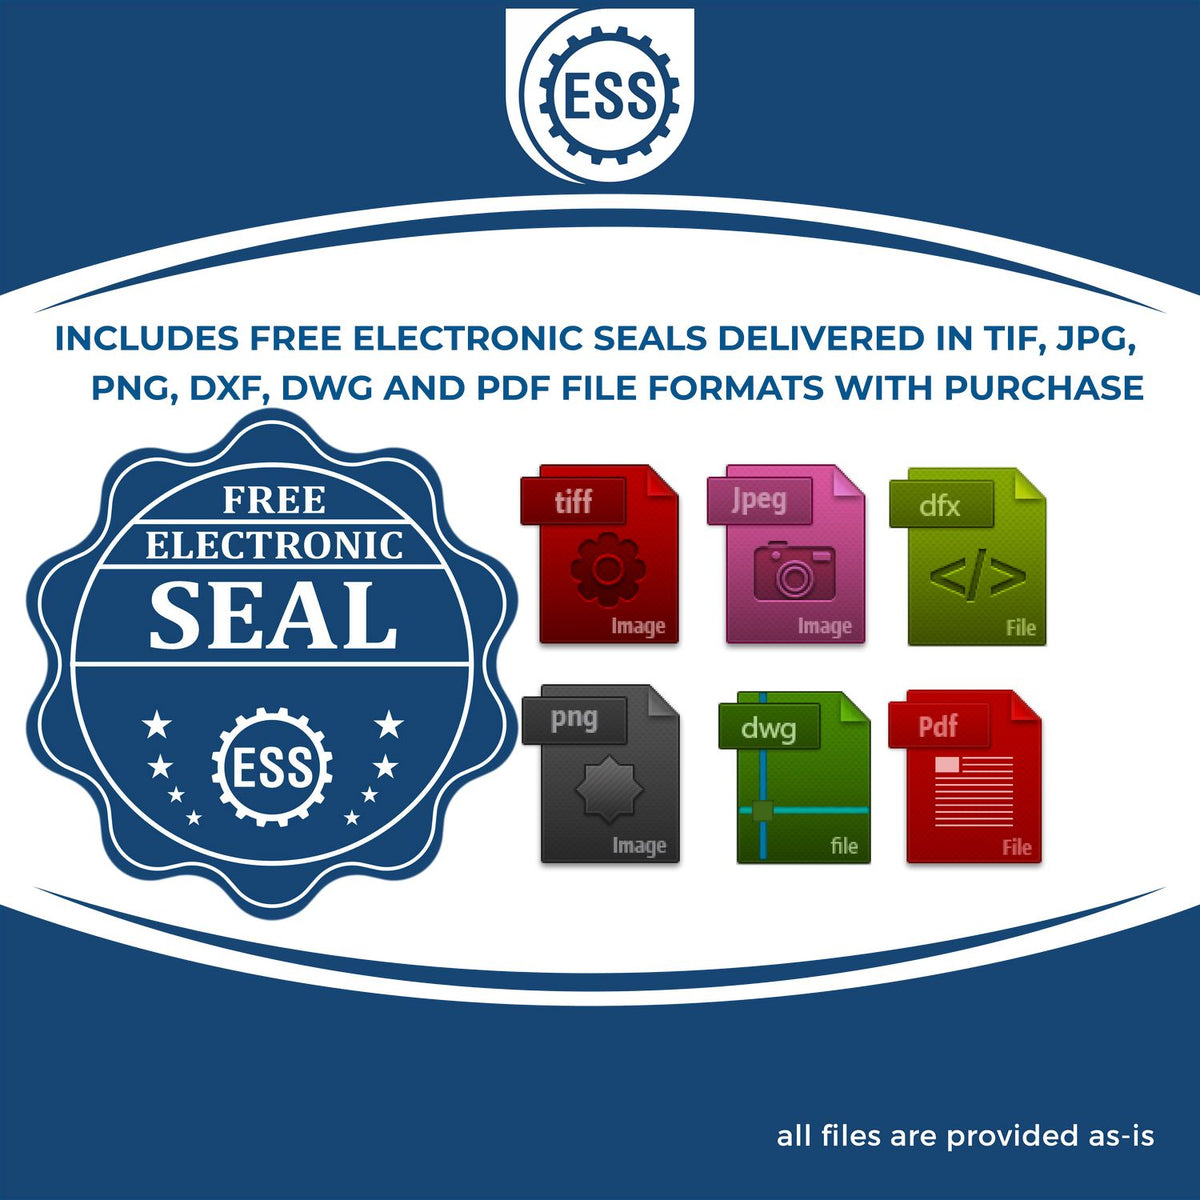 An infographic for the free electronic seal for the Slim Pre-Inked North Dakota Land Surveyor Seal Stamp illustrating the different file type icons such as DXF, DWG, TIF, JPG and PNG.